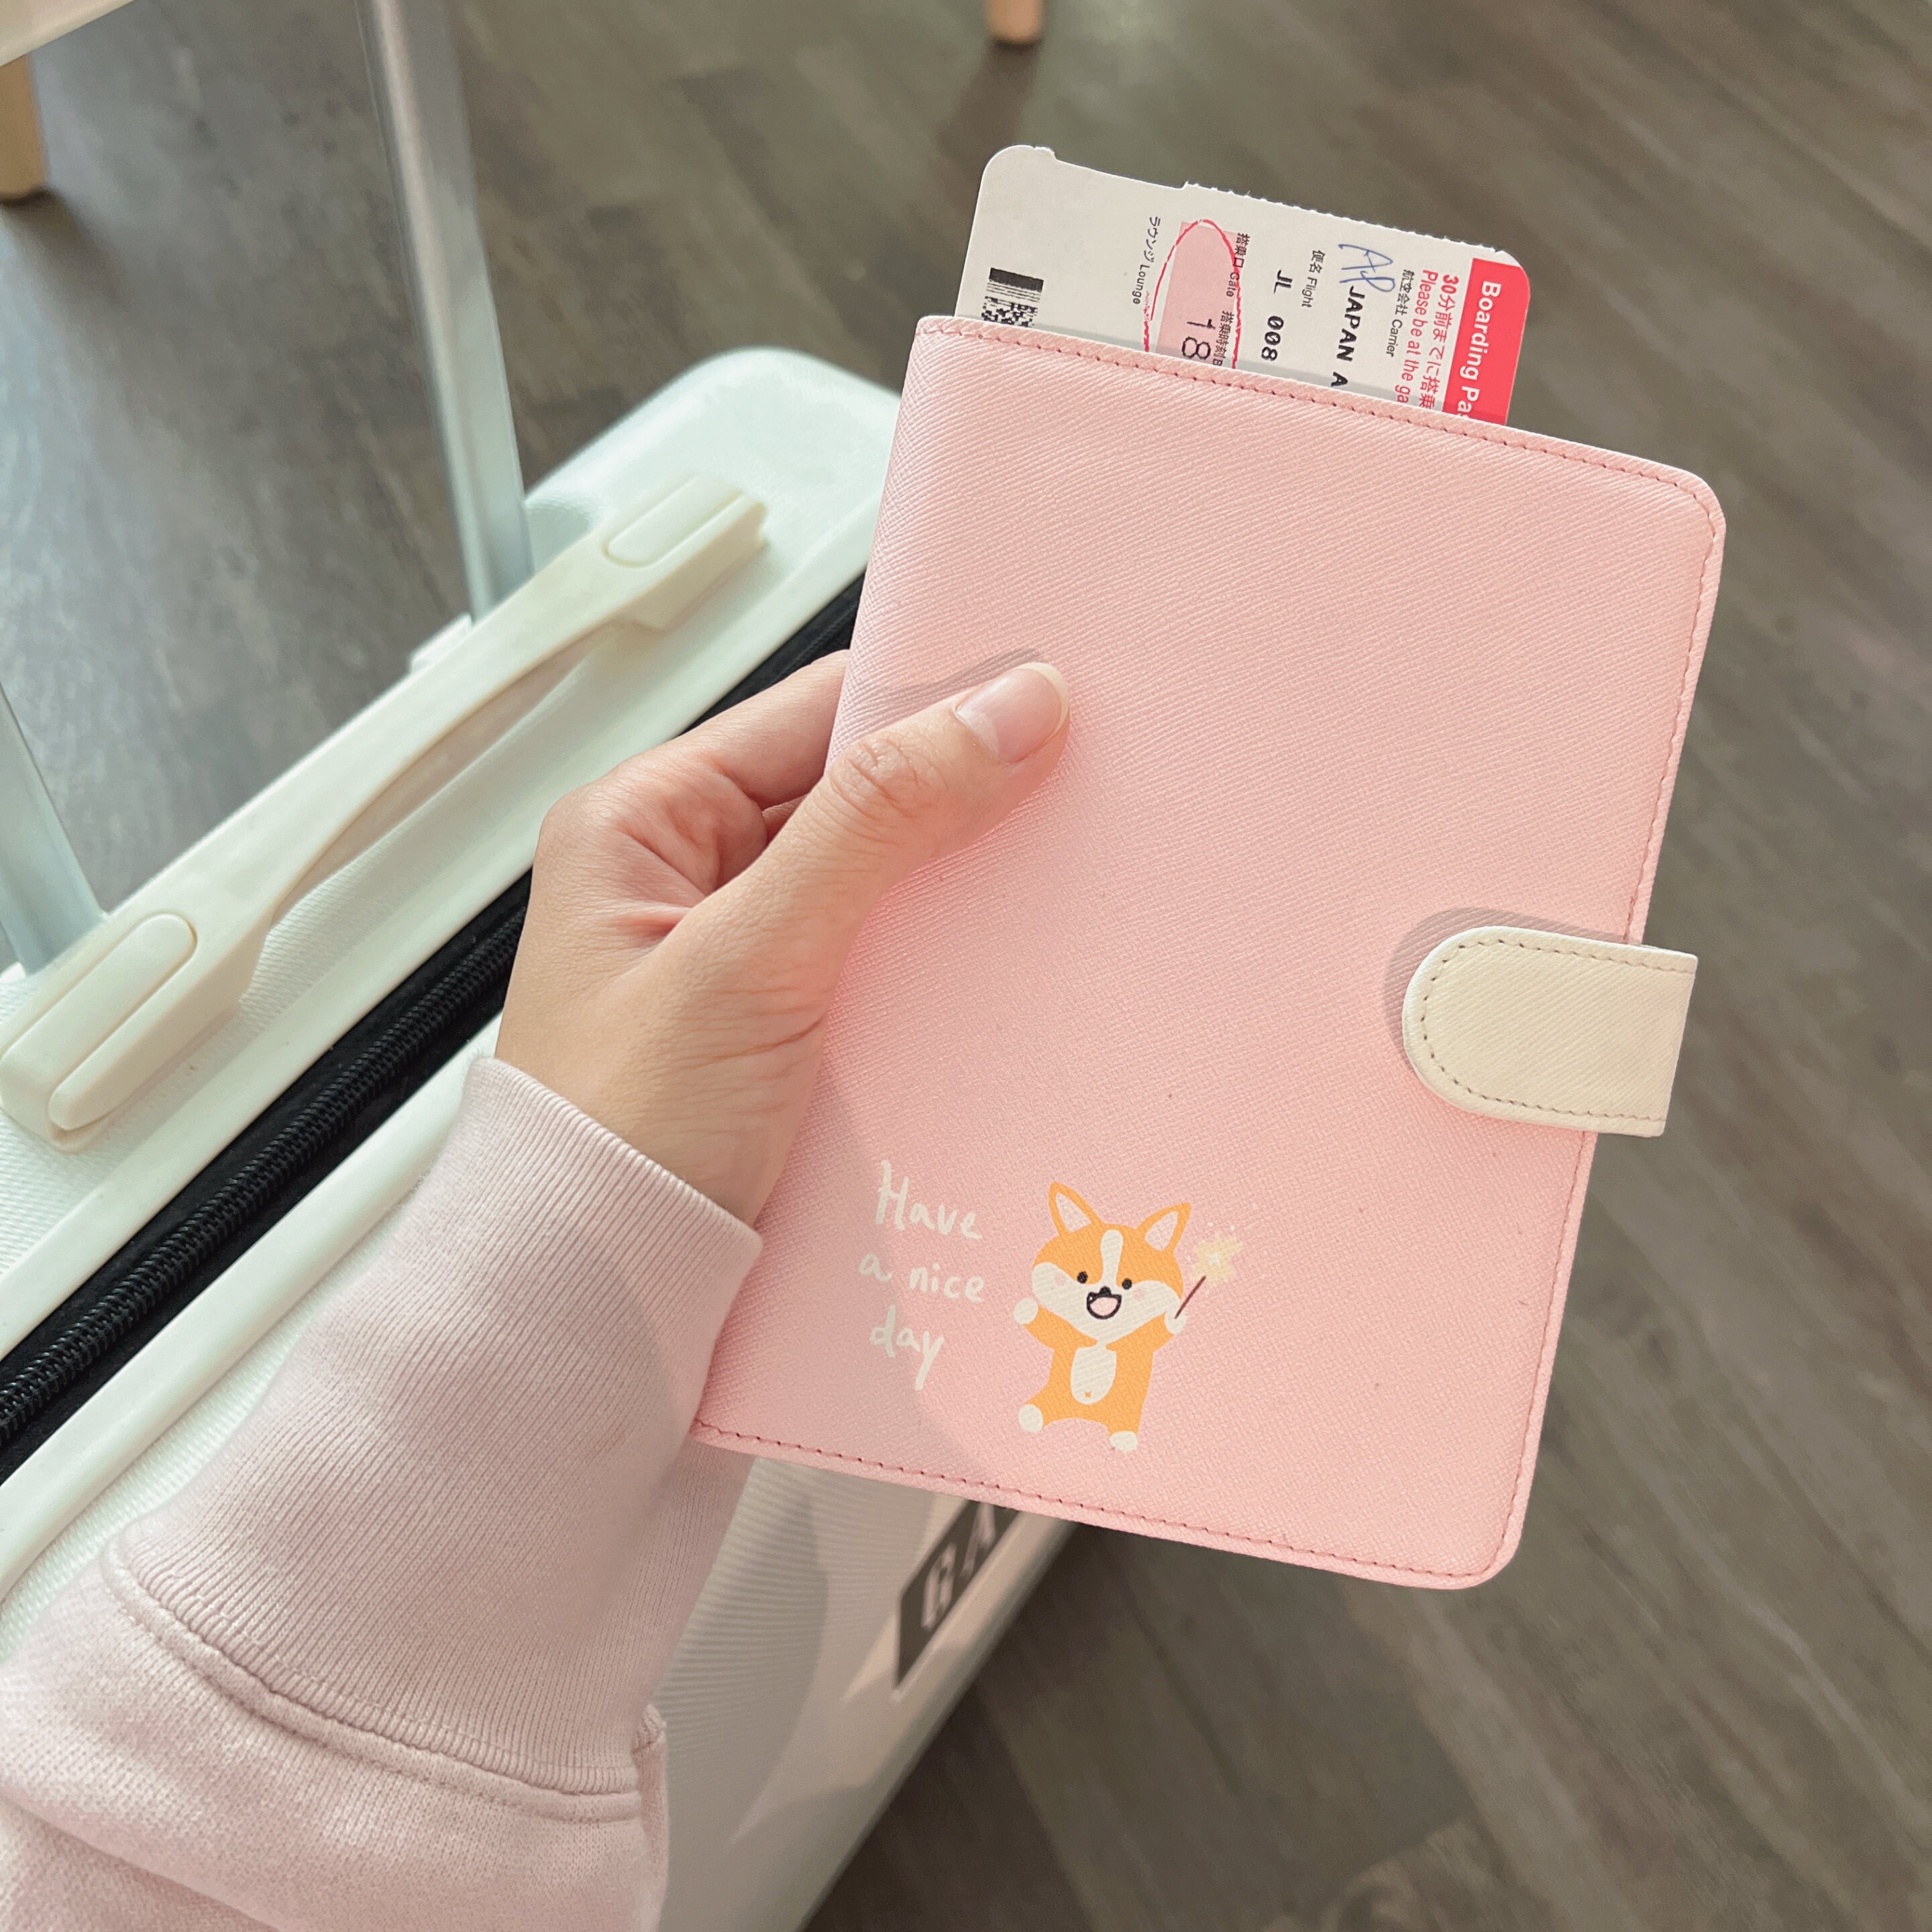 Cute Passport Covers For All Budgets (From $4 to $400!) - Style in the Way